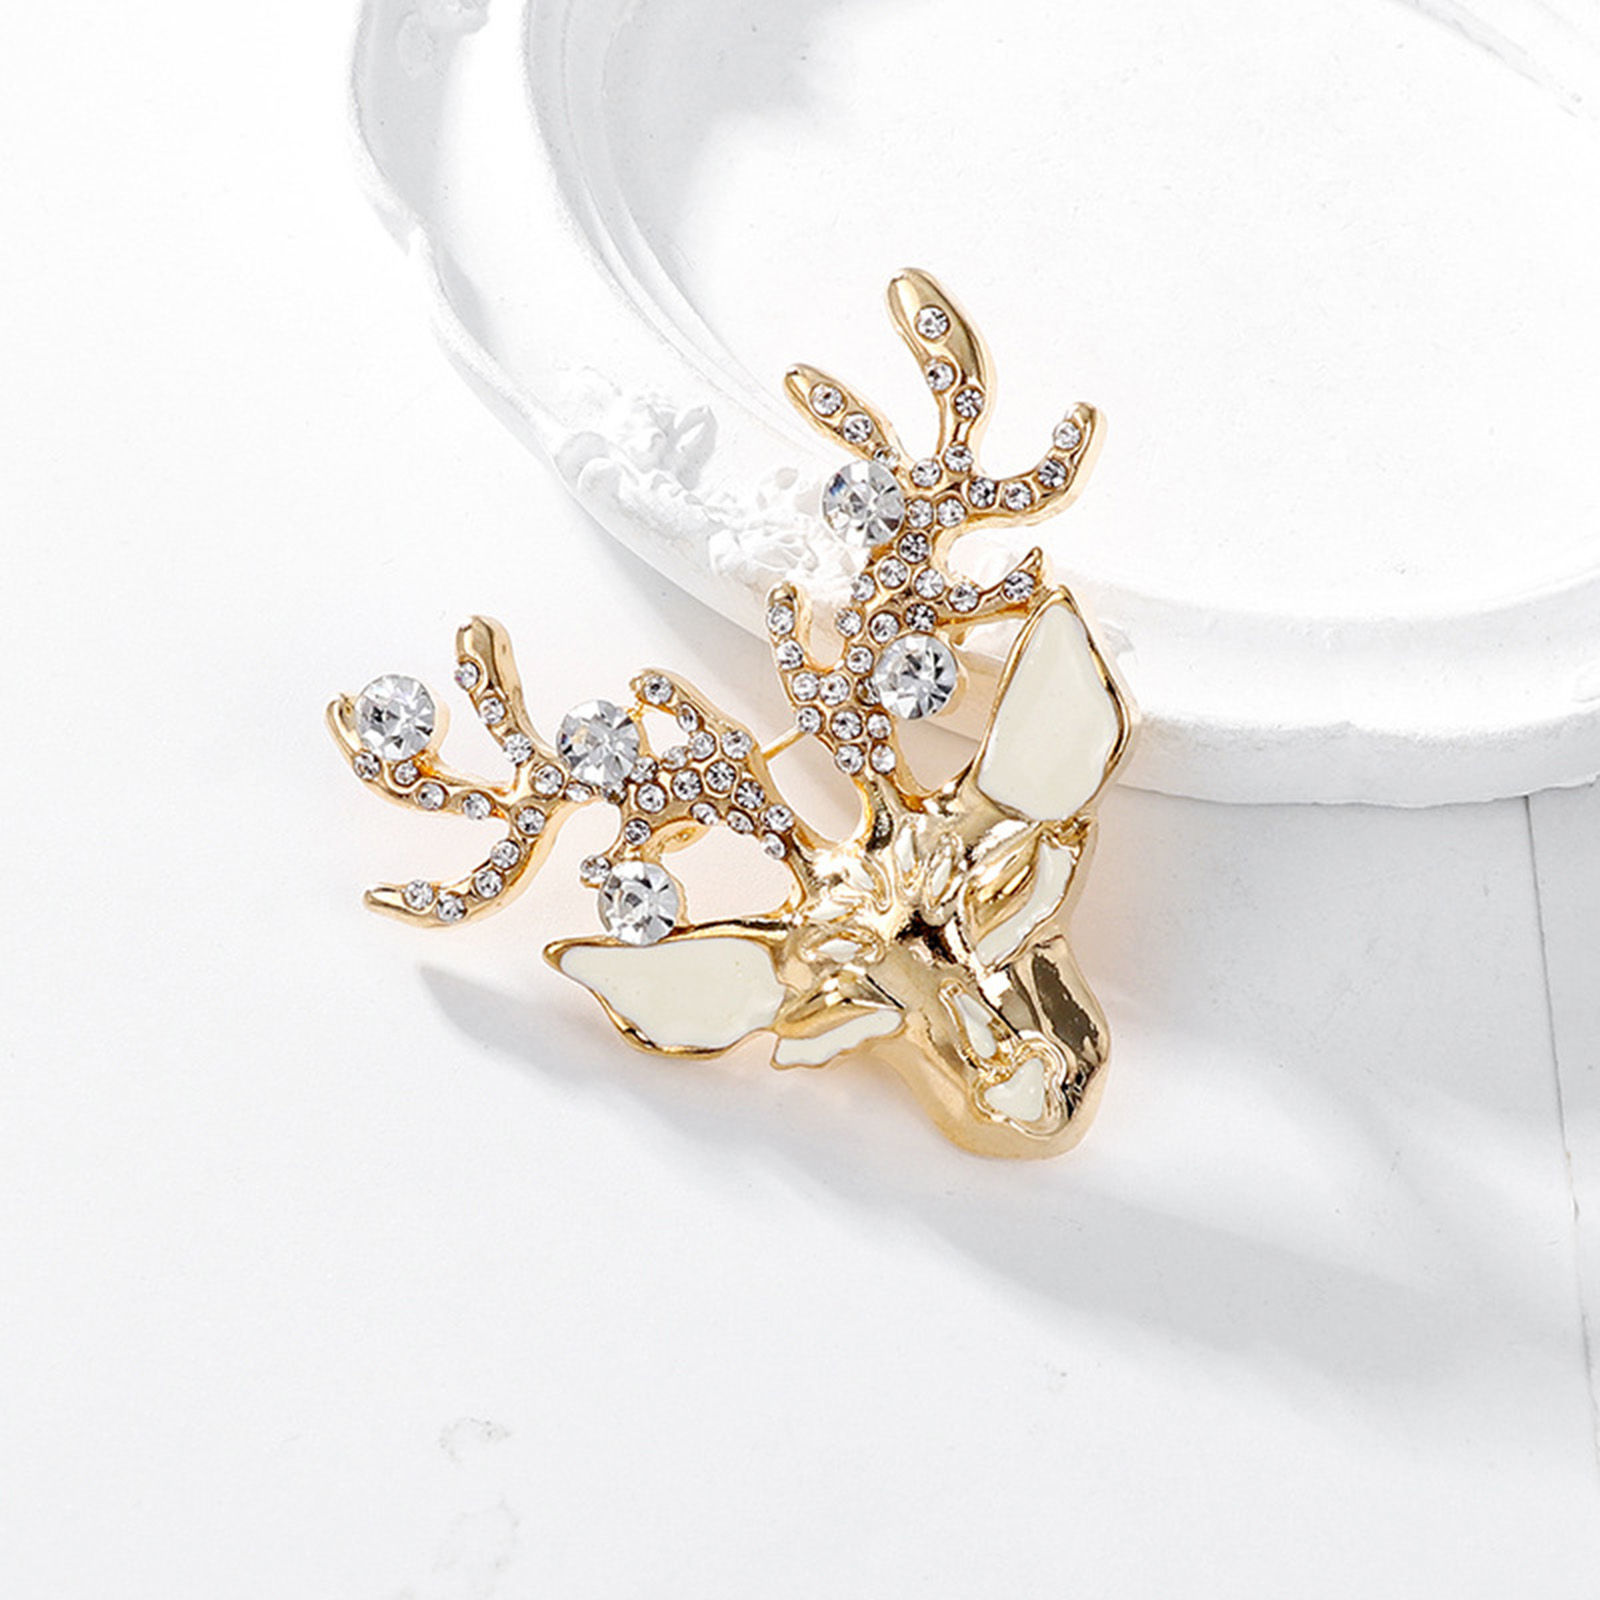 Picture of Retro Pin Brooches Christmas Reindeer Gold Plated Clear Rhinestone 5.3cm x 4.9cm, 1 Piece